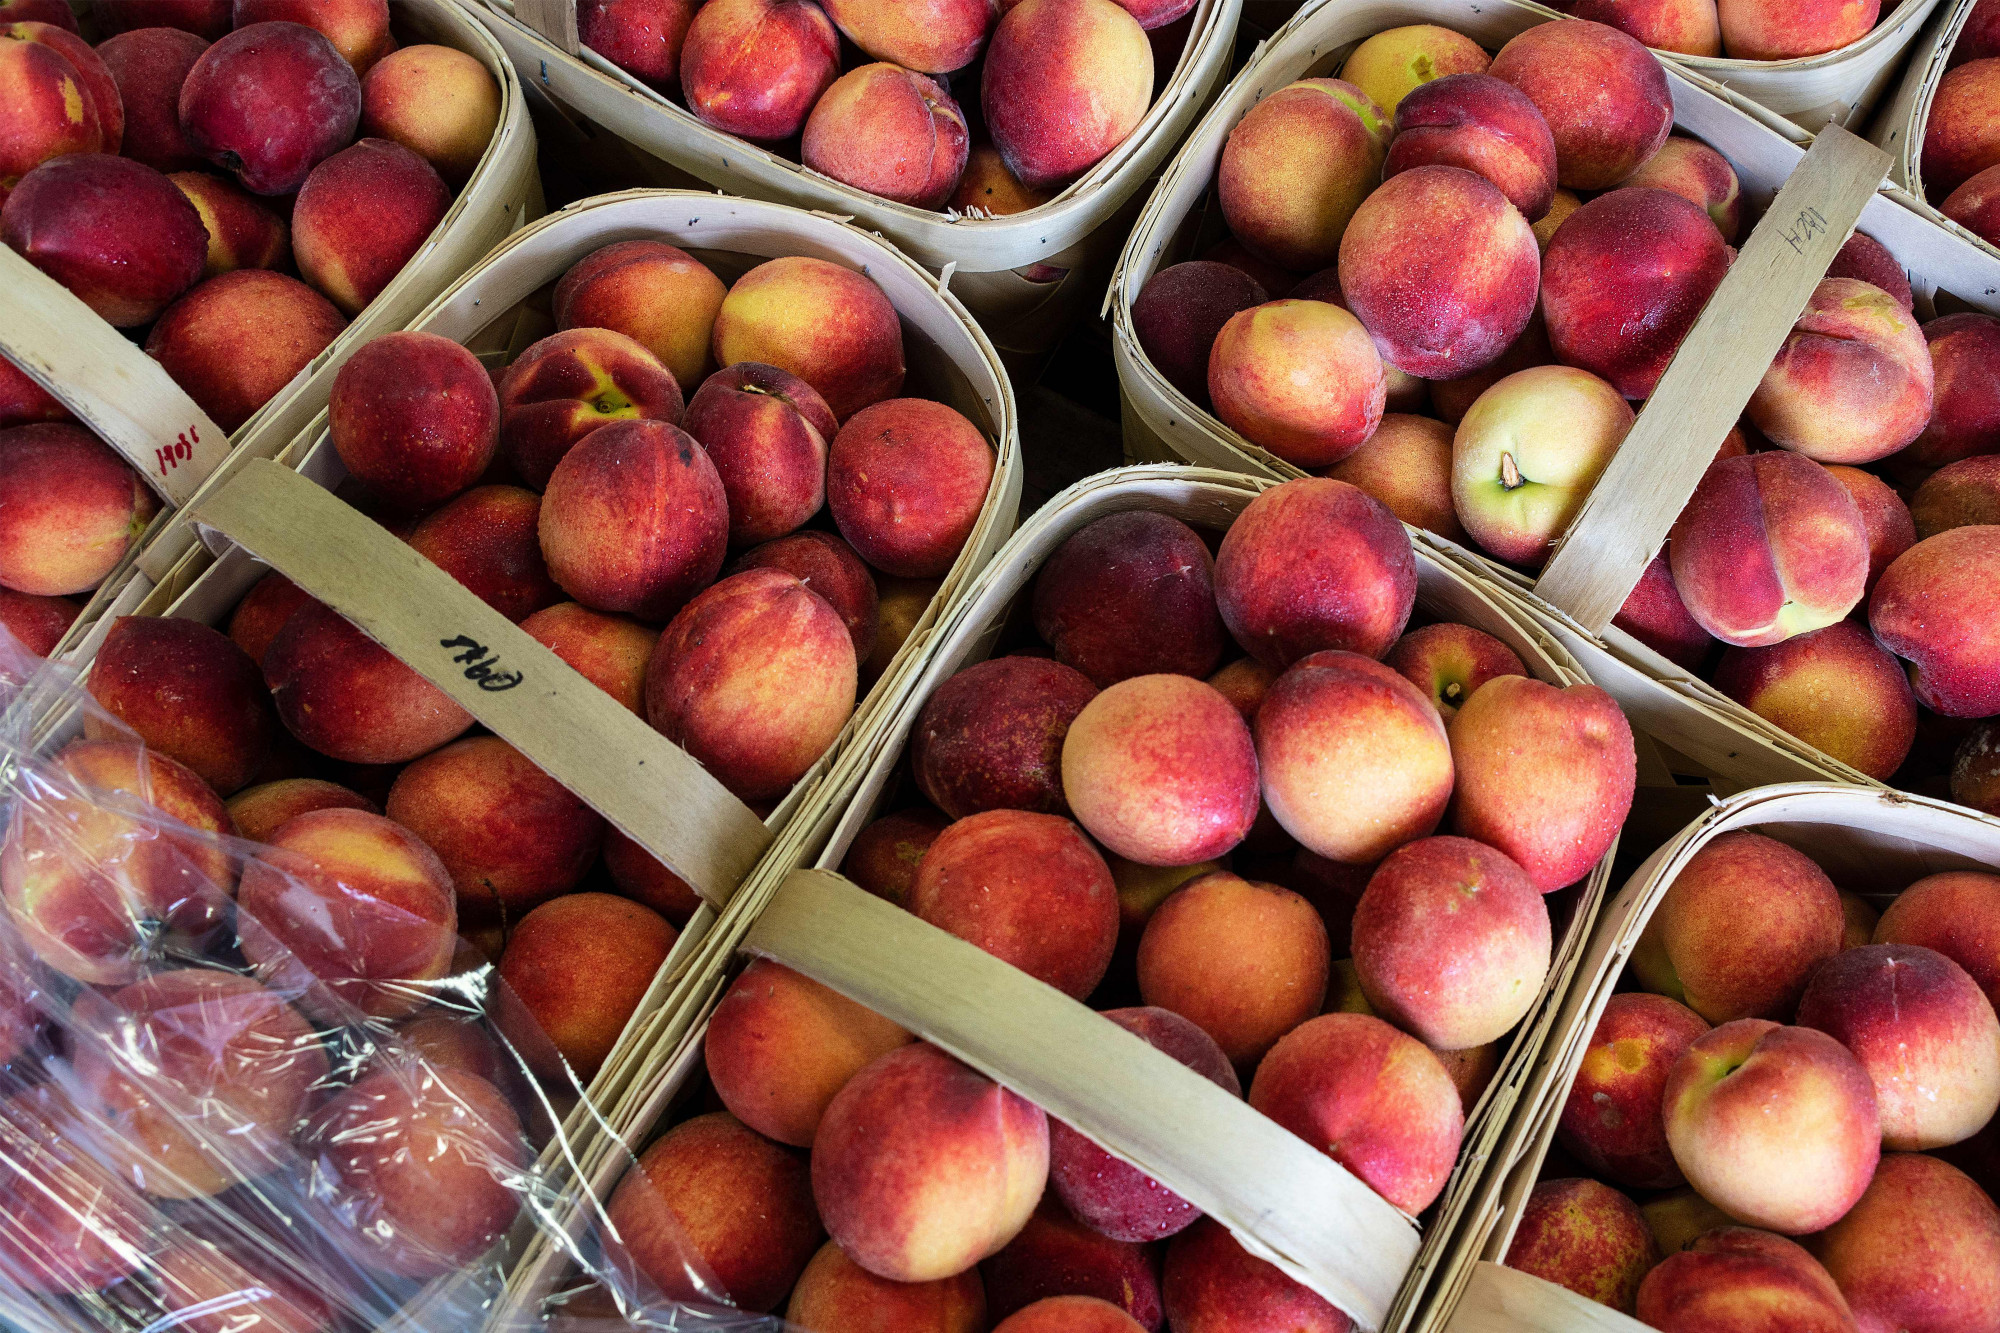 Peaches May Be Linked to Salmonella Outbreak That Has Sickened 68 People in 9 States